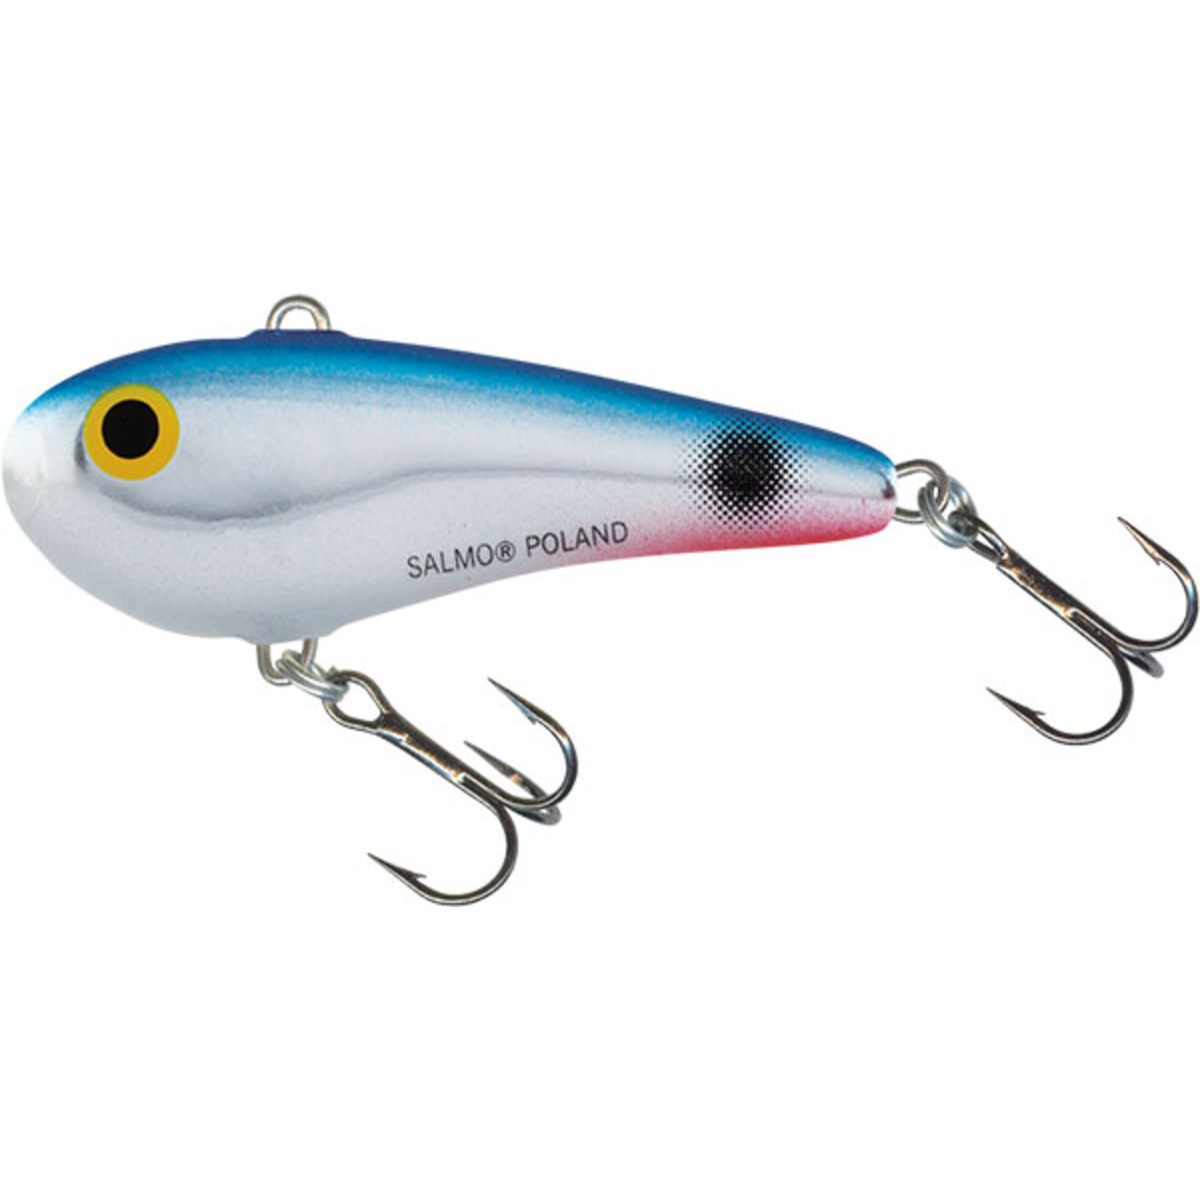 Salmo Chubby Darter Sinking - 4 Cm - Red Tail Shiner